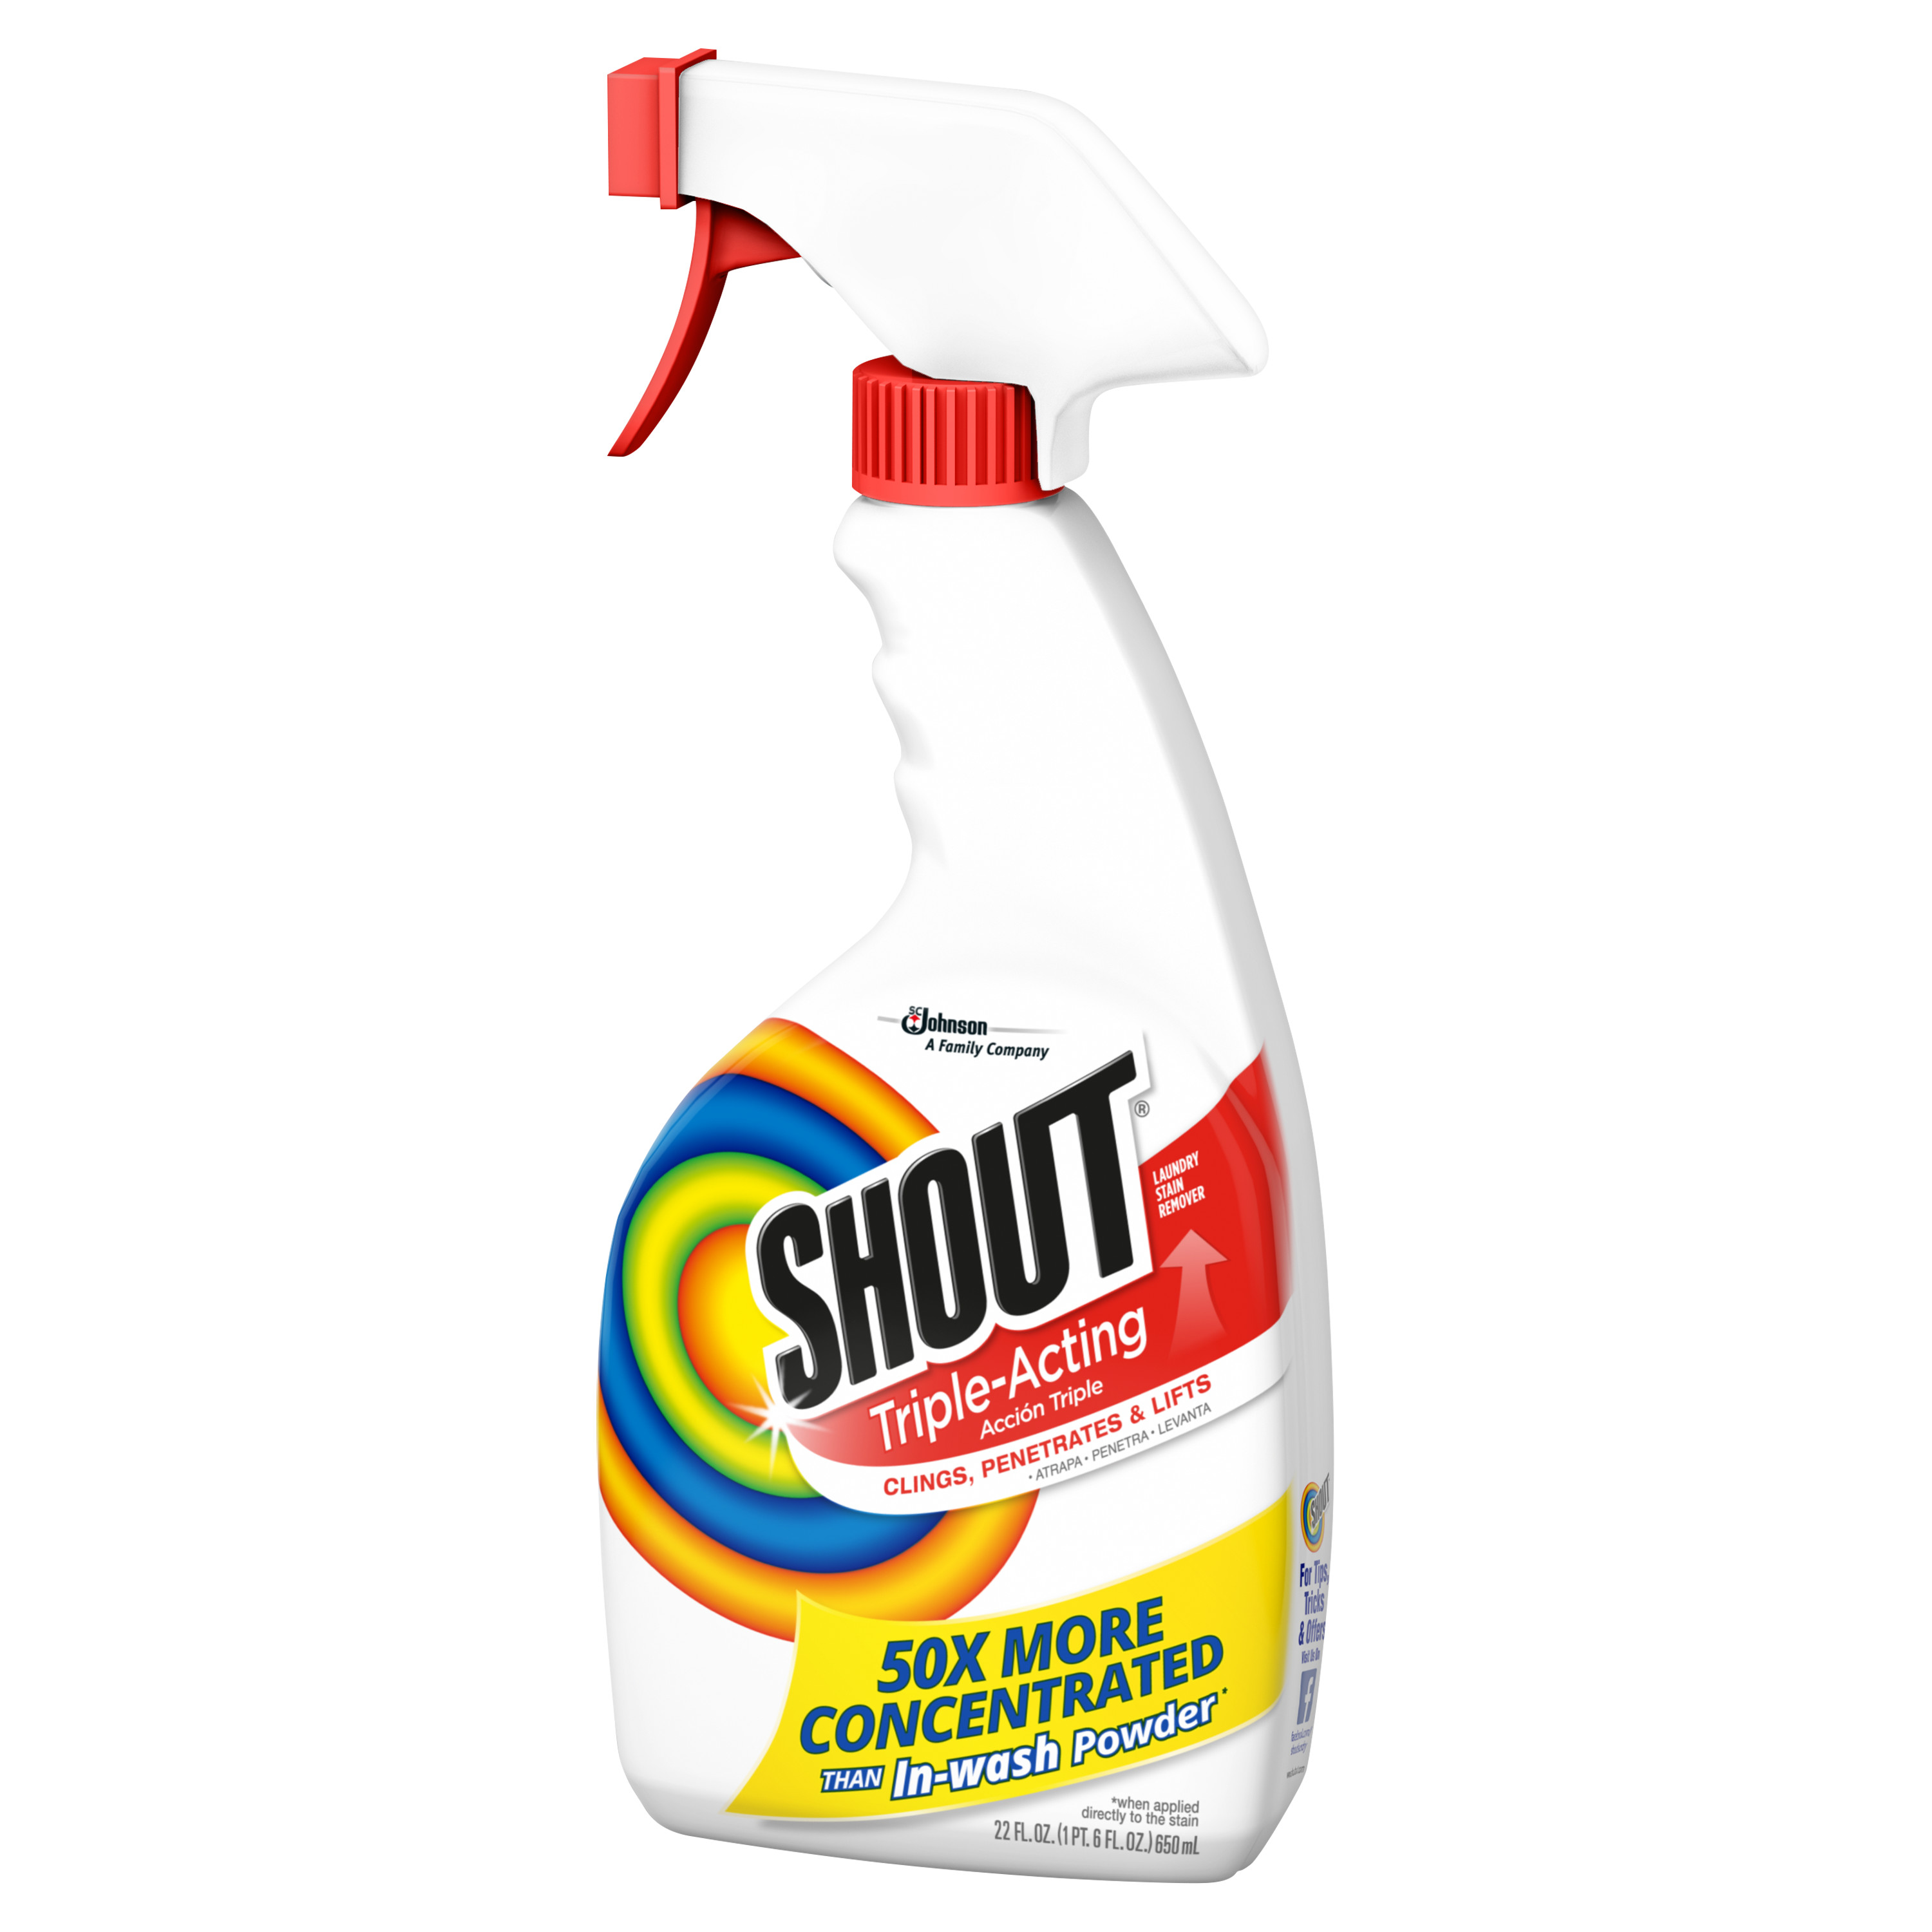 Shout Triple-Acting, Laundry Stain Remover, 22 Ounce - image 11 of 13